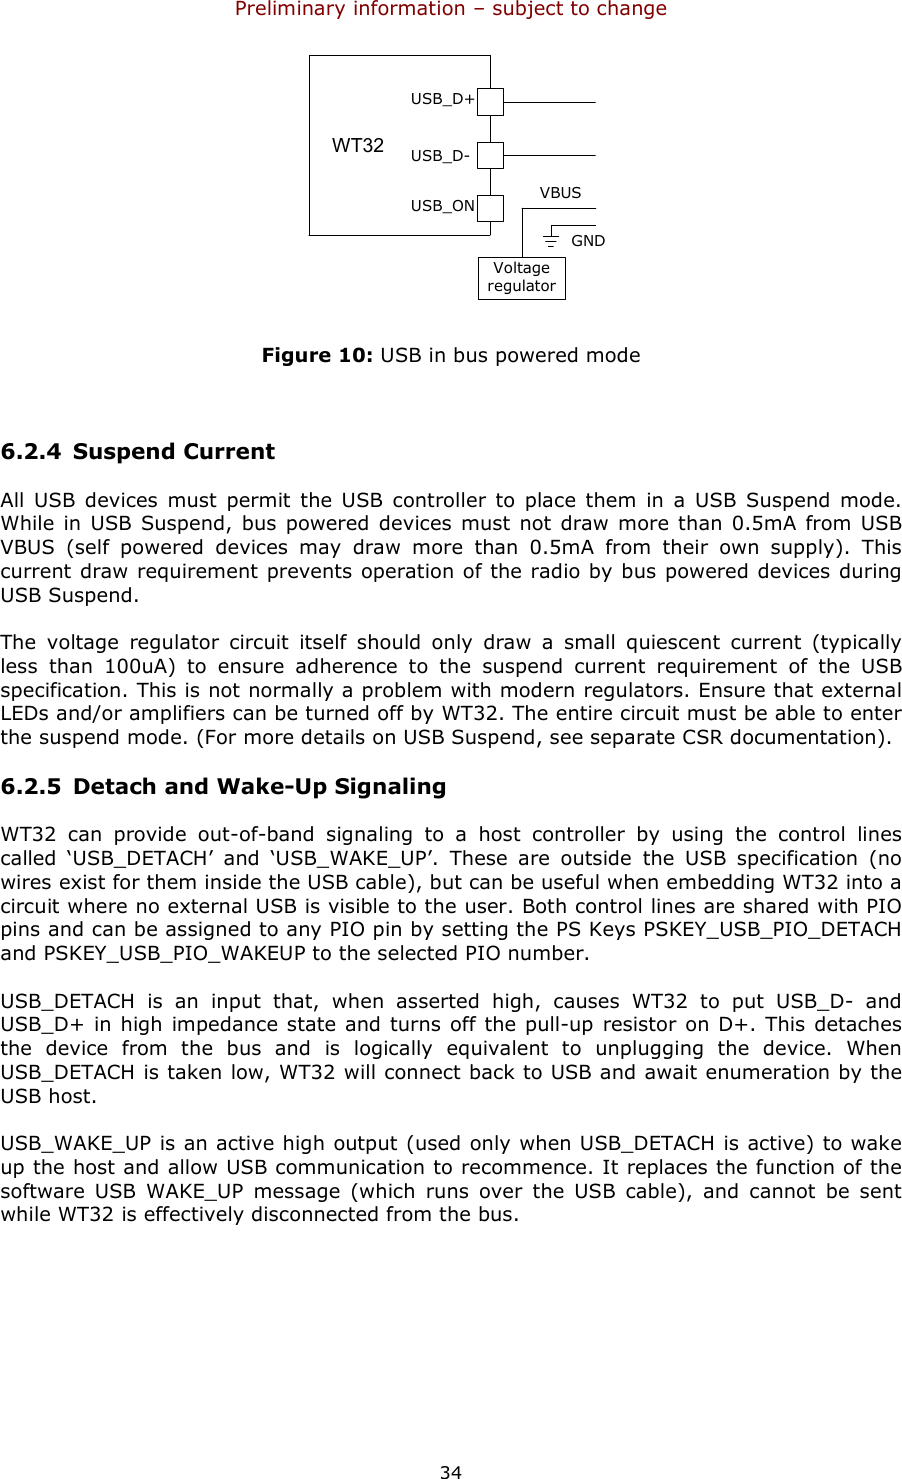 Preliminary information – subject to change  34 USB_D+USB_D-USB_ONVoltageregulatorWT12VBUSGNDWT32 Figure 10: USB in bus powered mode  6.2.4 Suspend Current All  USB  devices  must  permit  the USB  controller to  place  them  in  a USB  Suspend  mode. While in  USB Suspend,  bus powered  devices  must  not draw more than 0.5mA  from USB VBUS  (self  powered  devices  may  draw  more  than  0.5mA  from  their  own  supply).  This current draw requirement prevents operation of the radio by bus powered devices during USB Suspend. The  voltage  regulator  circuit  itself  should  only  draw  a  small  quiescent  current  (typically less  than  100uA)  to  ensure  adherence  to  the  suspend  current  requirement  of  the  USB specification. This is not normally a problem with modern regulators. Ensure that external LEDs and/or amplifiers can be turned off by WT32. The entire circuit must be able to enter the suspend mode. (For more details on USB Suspend, see separate CSR documentation). 6.2.5 Detach and Wake-Up Signaling WT32  can  provide  out-of-band  signaling  to  a  host  controller  by  using  the  control  lines called  ‘USB_DETACH’  and  ‘USB_WAKE_UP’.  These  are  outside  the  USB  specification  (no wires exist for them inside the USB cable), but can be useful when embedding WT32 into a circuit where no external USB is visible to the user. Both control lines are shared with PIO pins and can be assigned to any PIO pin by setting the PS Keys PSKEY_USB_PIO_DETACH and PSKEY_USB_PIO_WAKEUP to the selected PIO number. USB_DETACH  is  an  input  that,  when  asserted  high,  causes  WT32  to  put  USB_D-  and USB_D+ in high impedance state and turns off the pull-up resistor on D+. This detaches the  device  from  the  bus  and  is  logically  equivalent  to  unplugging  the  device.  When USB_DETACH is taken low, WT32 will connect back to USB and await enumeration by the USB host. USB_WAKE_UP is an active high output (used only when USB_DETACH is active) to wake up the host and allow USB communication to recommence. It replaces the function of the software  USB  WAKE_UP  message  (which  runs  over  the  USB  cable),  and  cannot  be  sent while WT32 is effectively disconnected from the bus. 